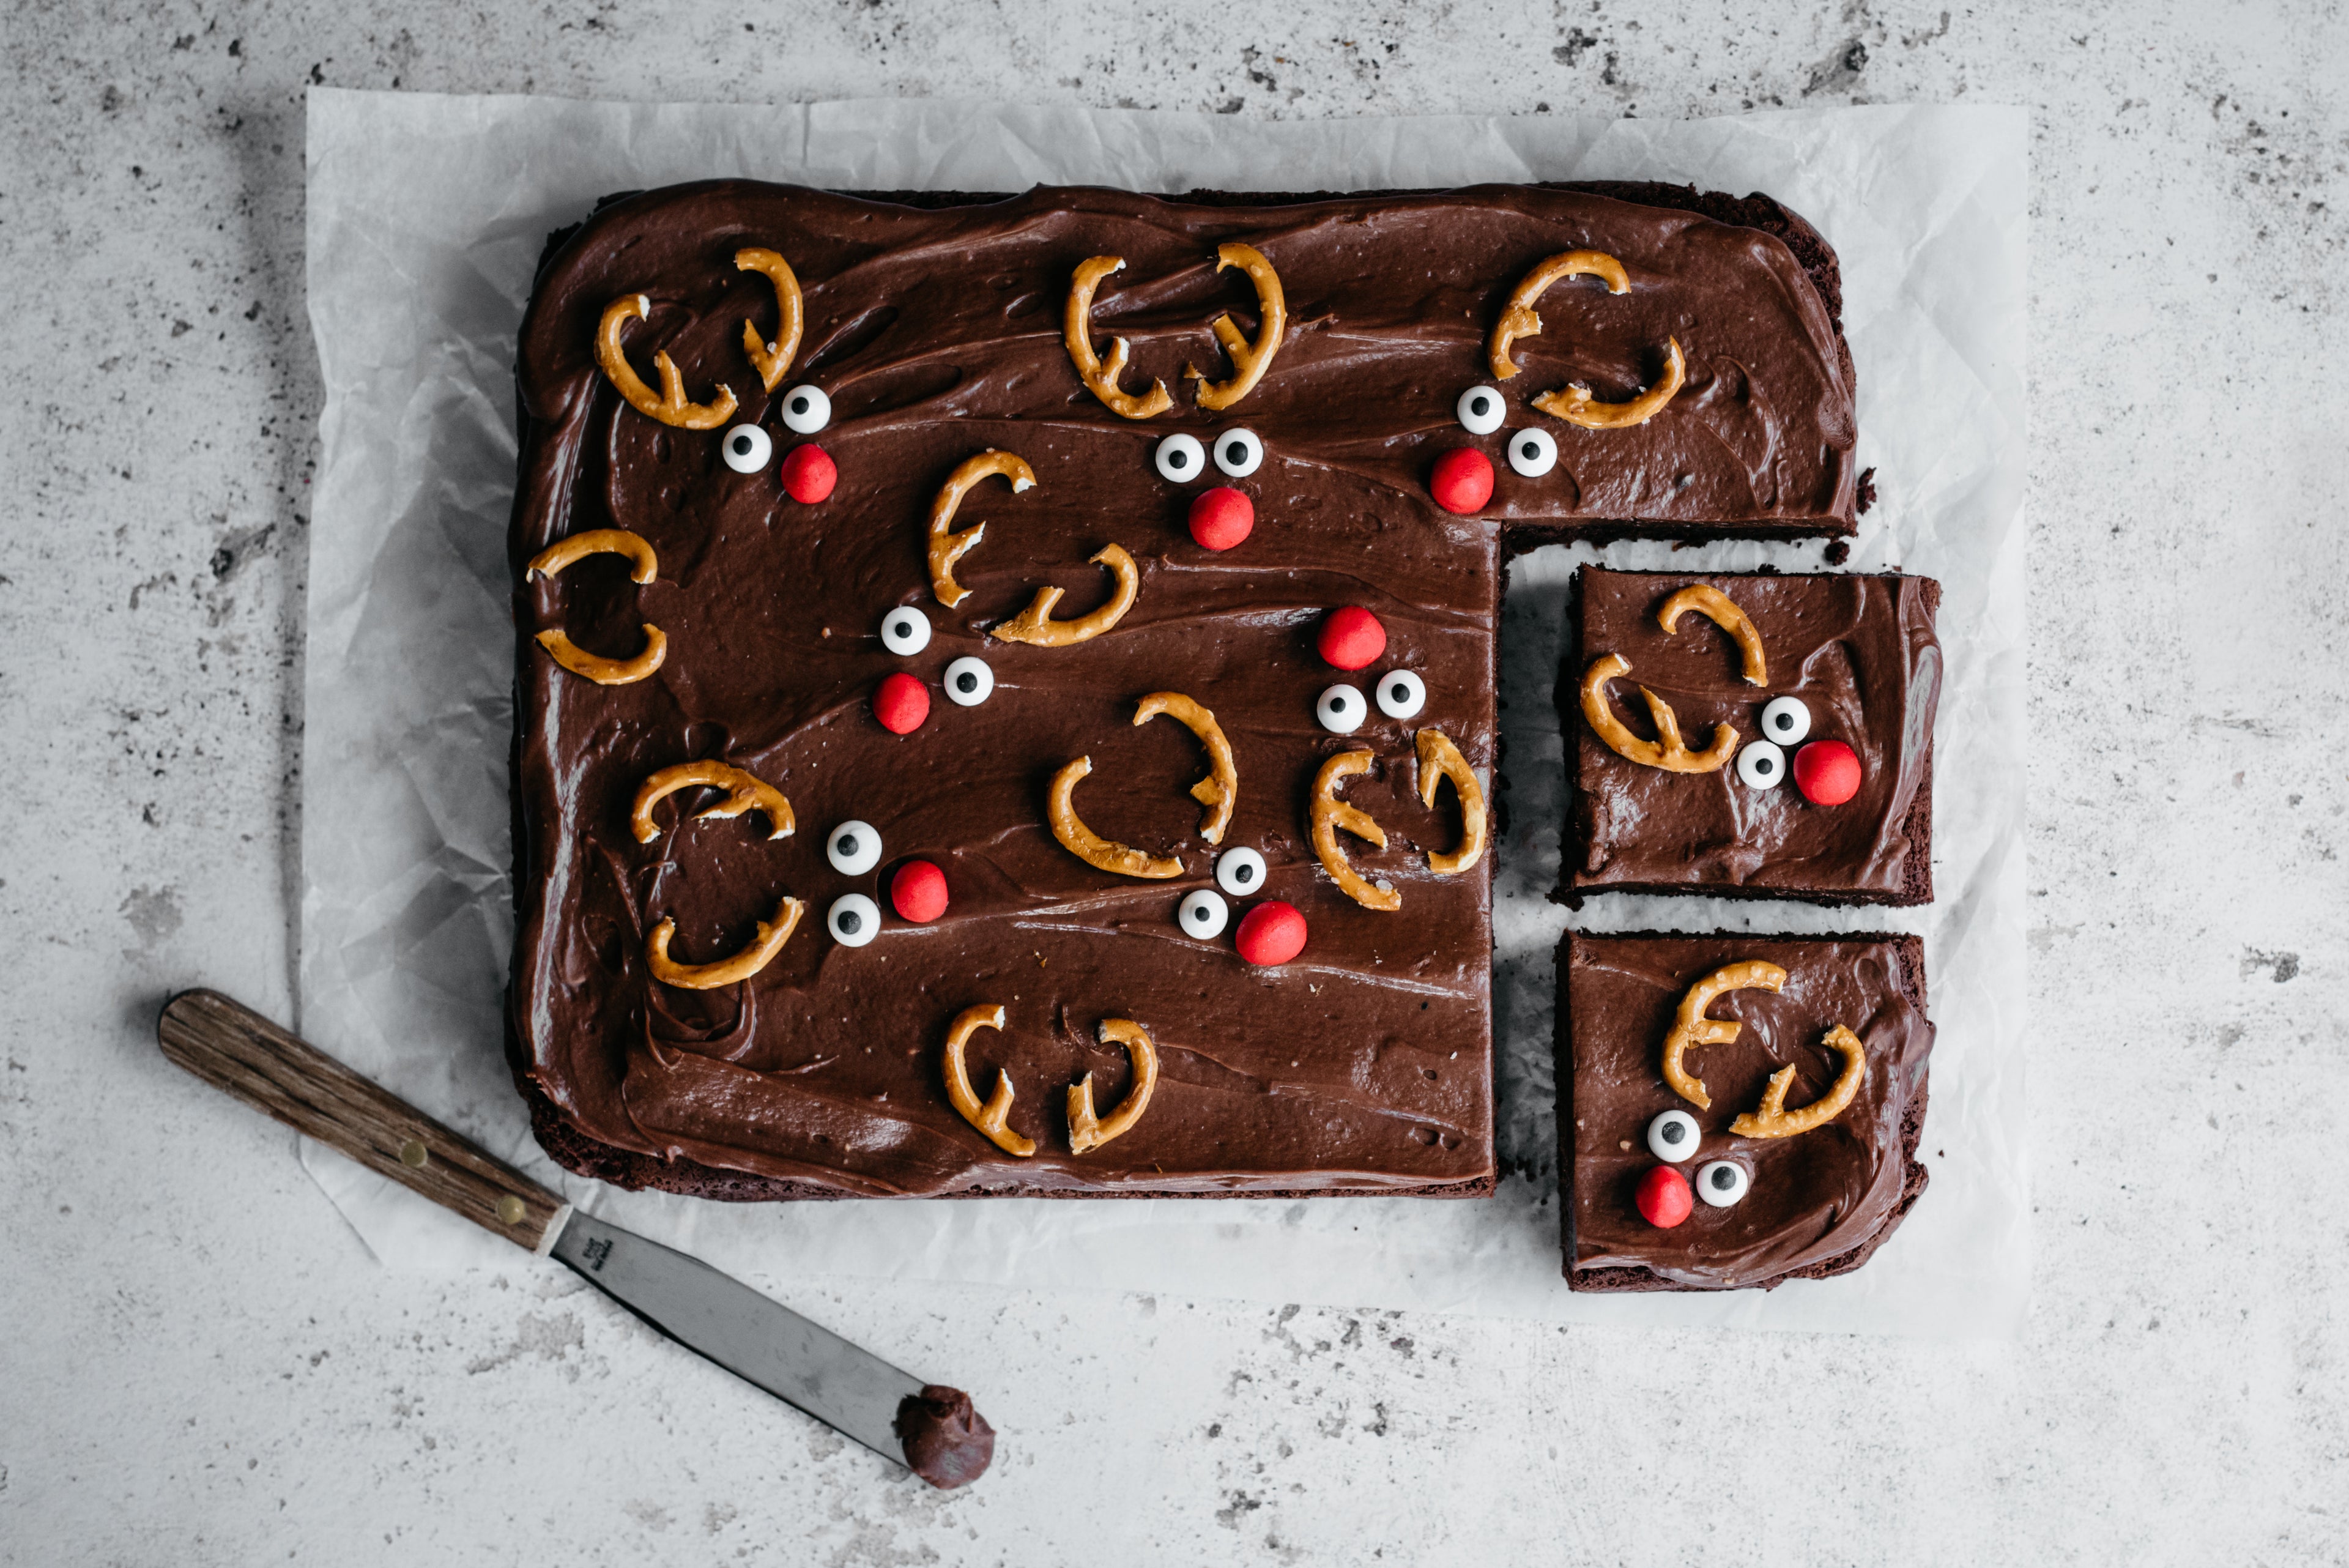 Chocolate & Caramel Reindeer Traybake with slices cut out next to a spoon covered in chocolate frosting